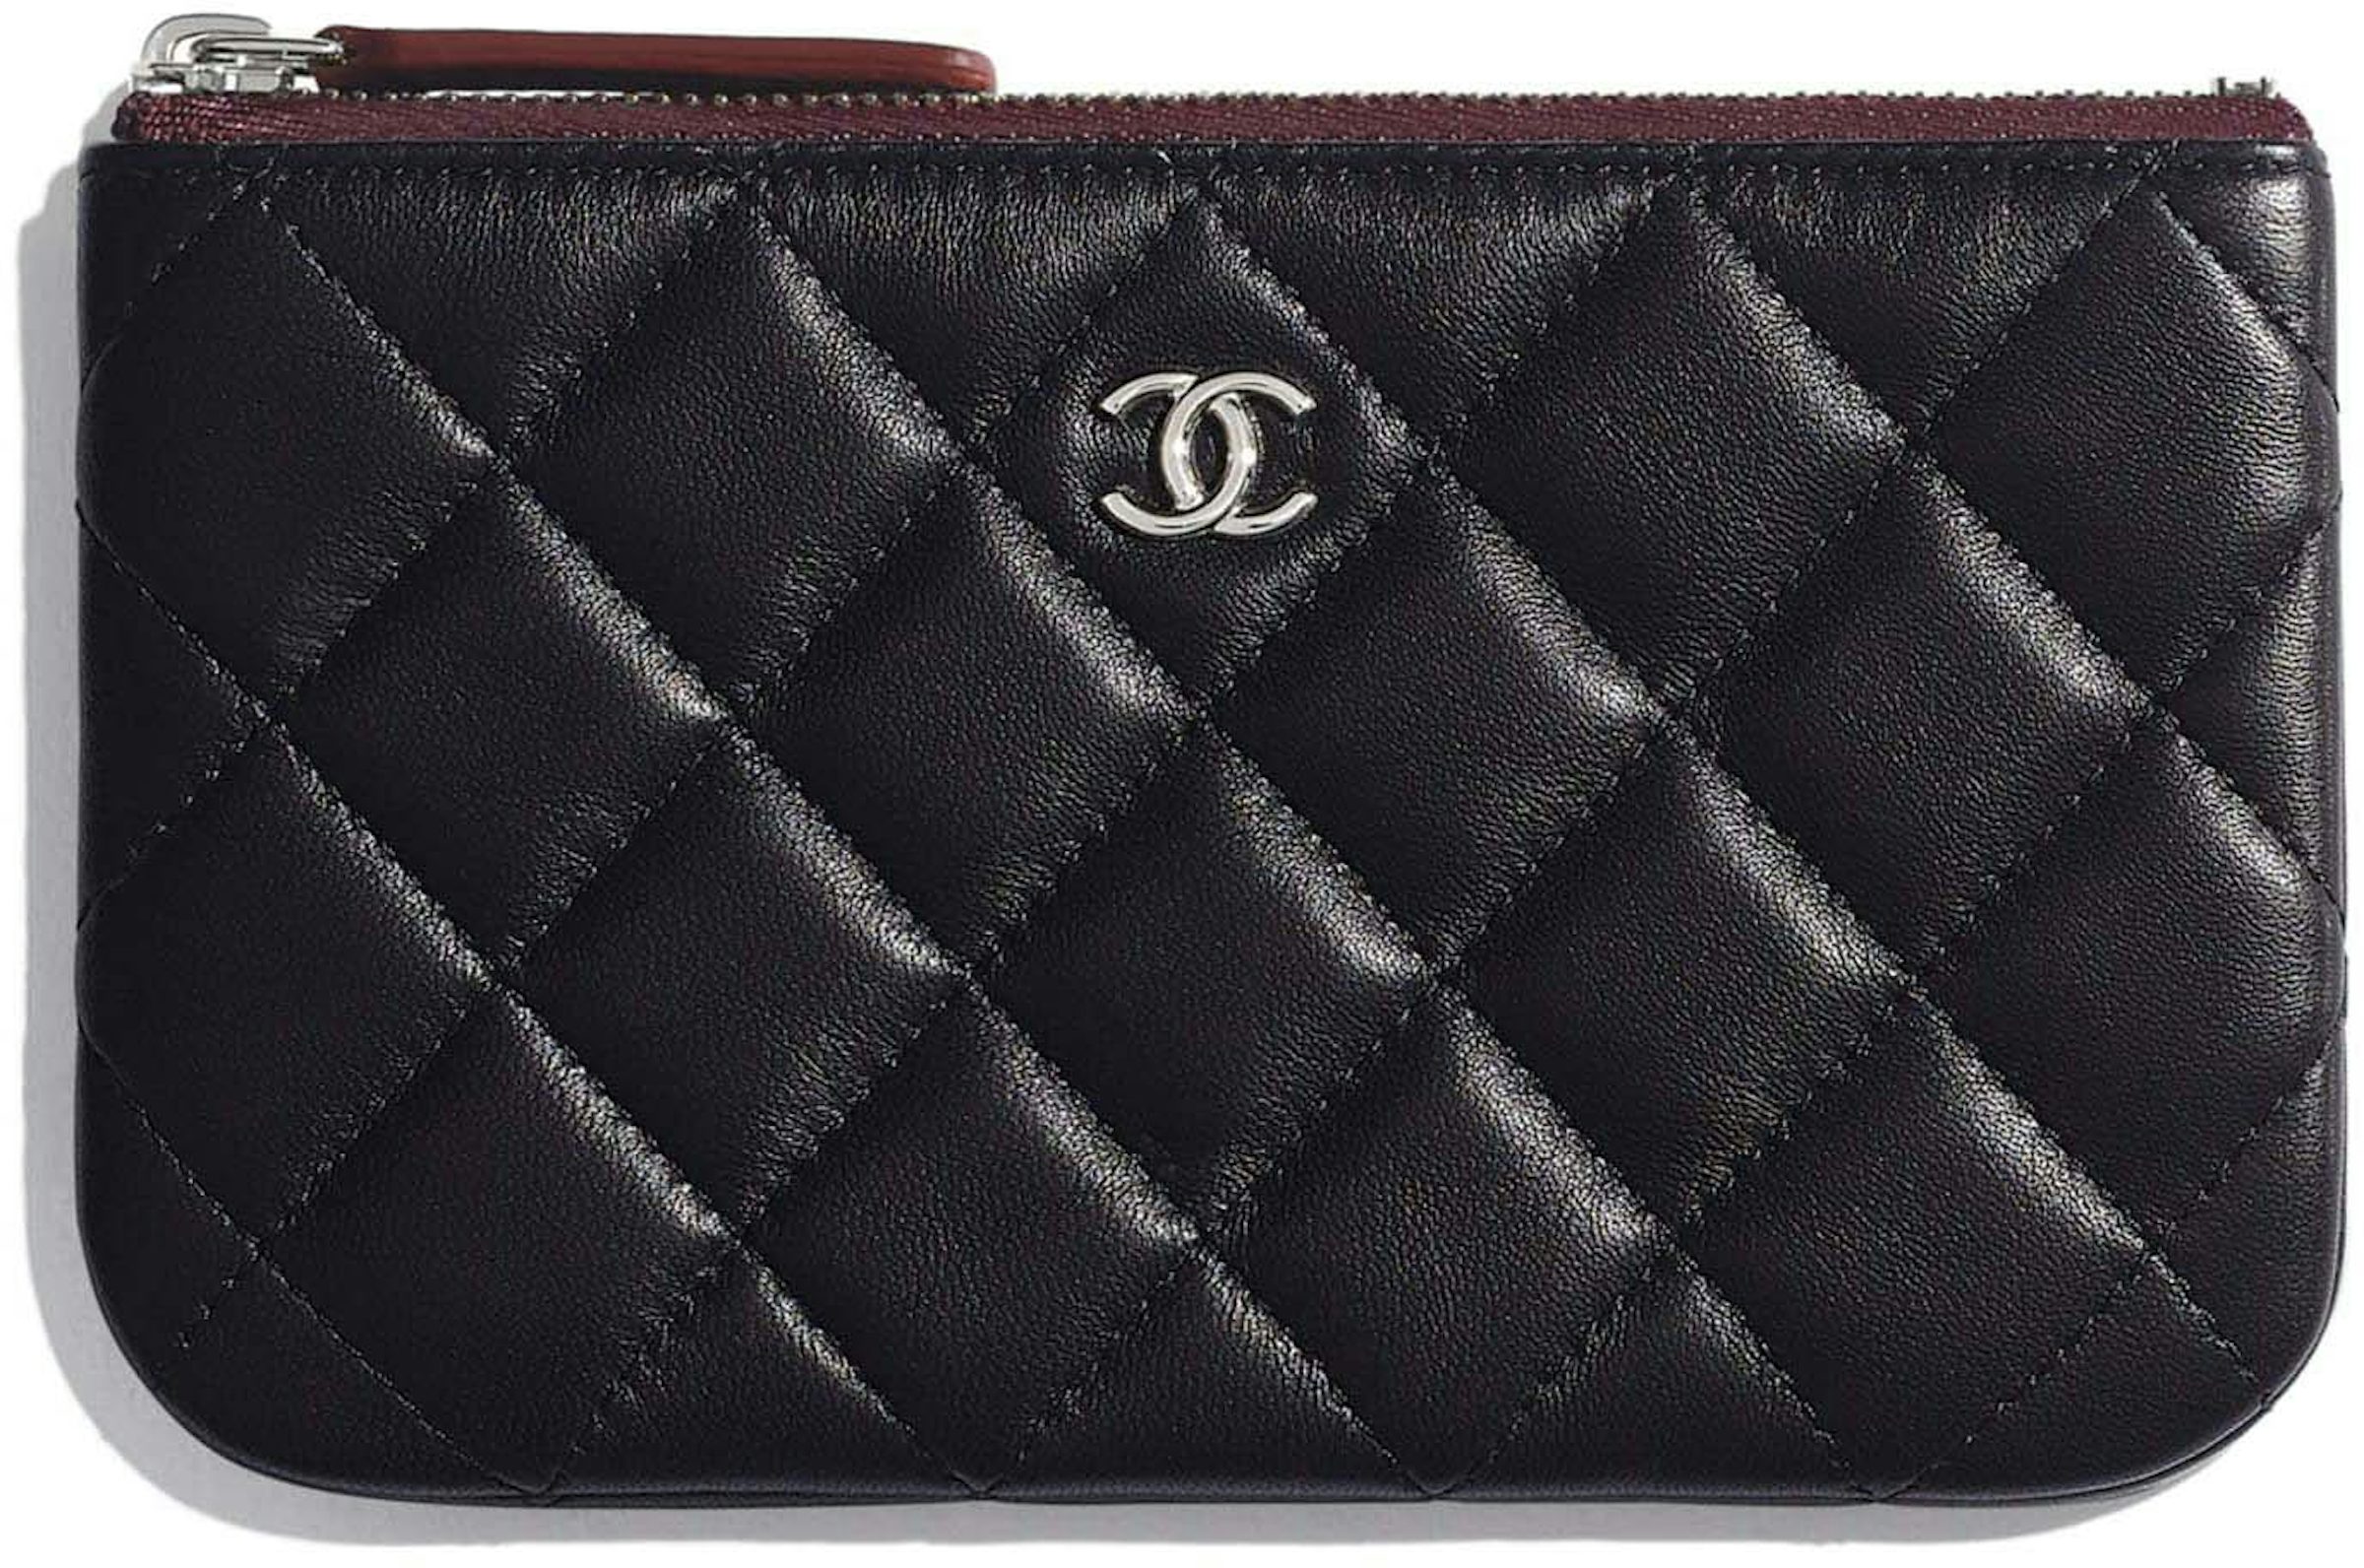 Chanel Classic Pouch Mini A82365 Black in Lambskin Leather with